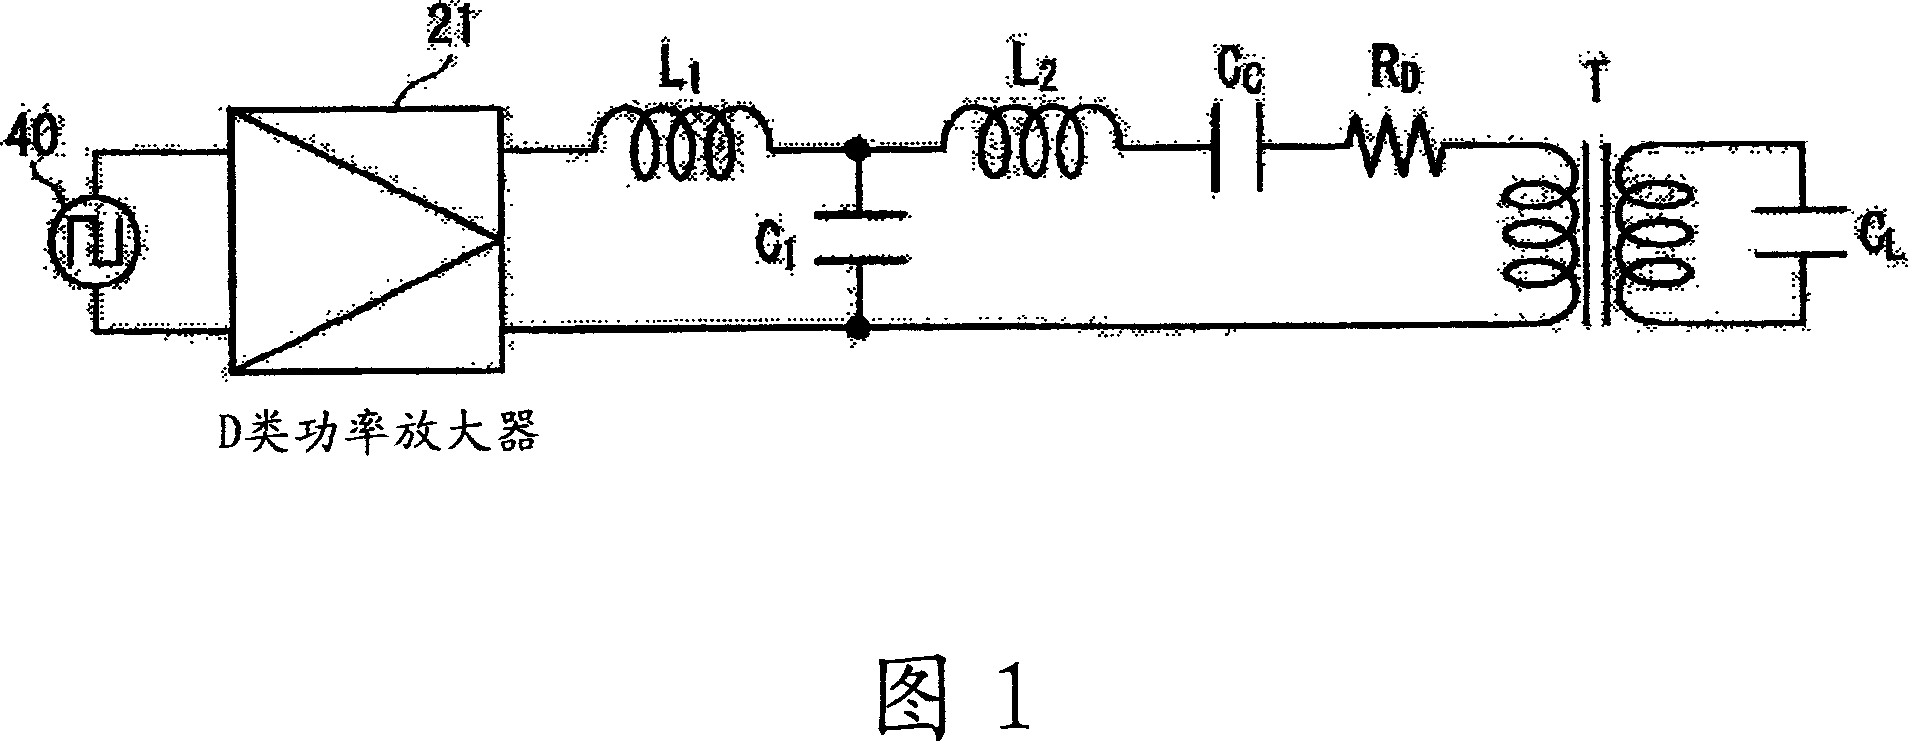 Electrostatic transducer, ultrasonic speaker, driving circuit of capacitive load